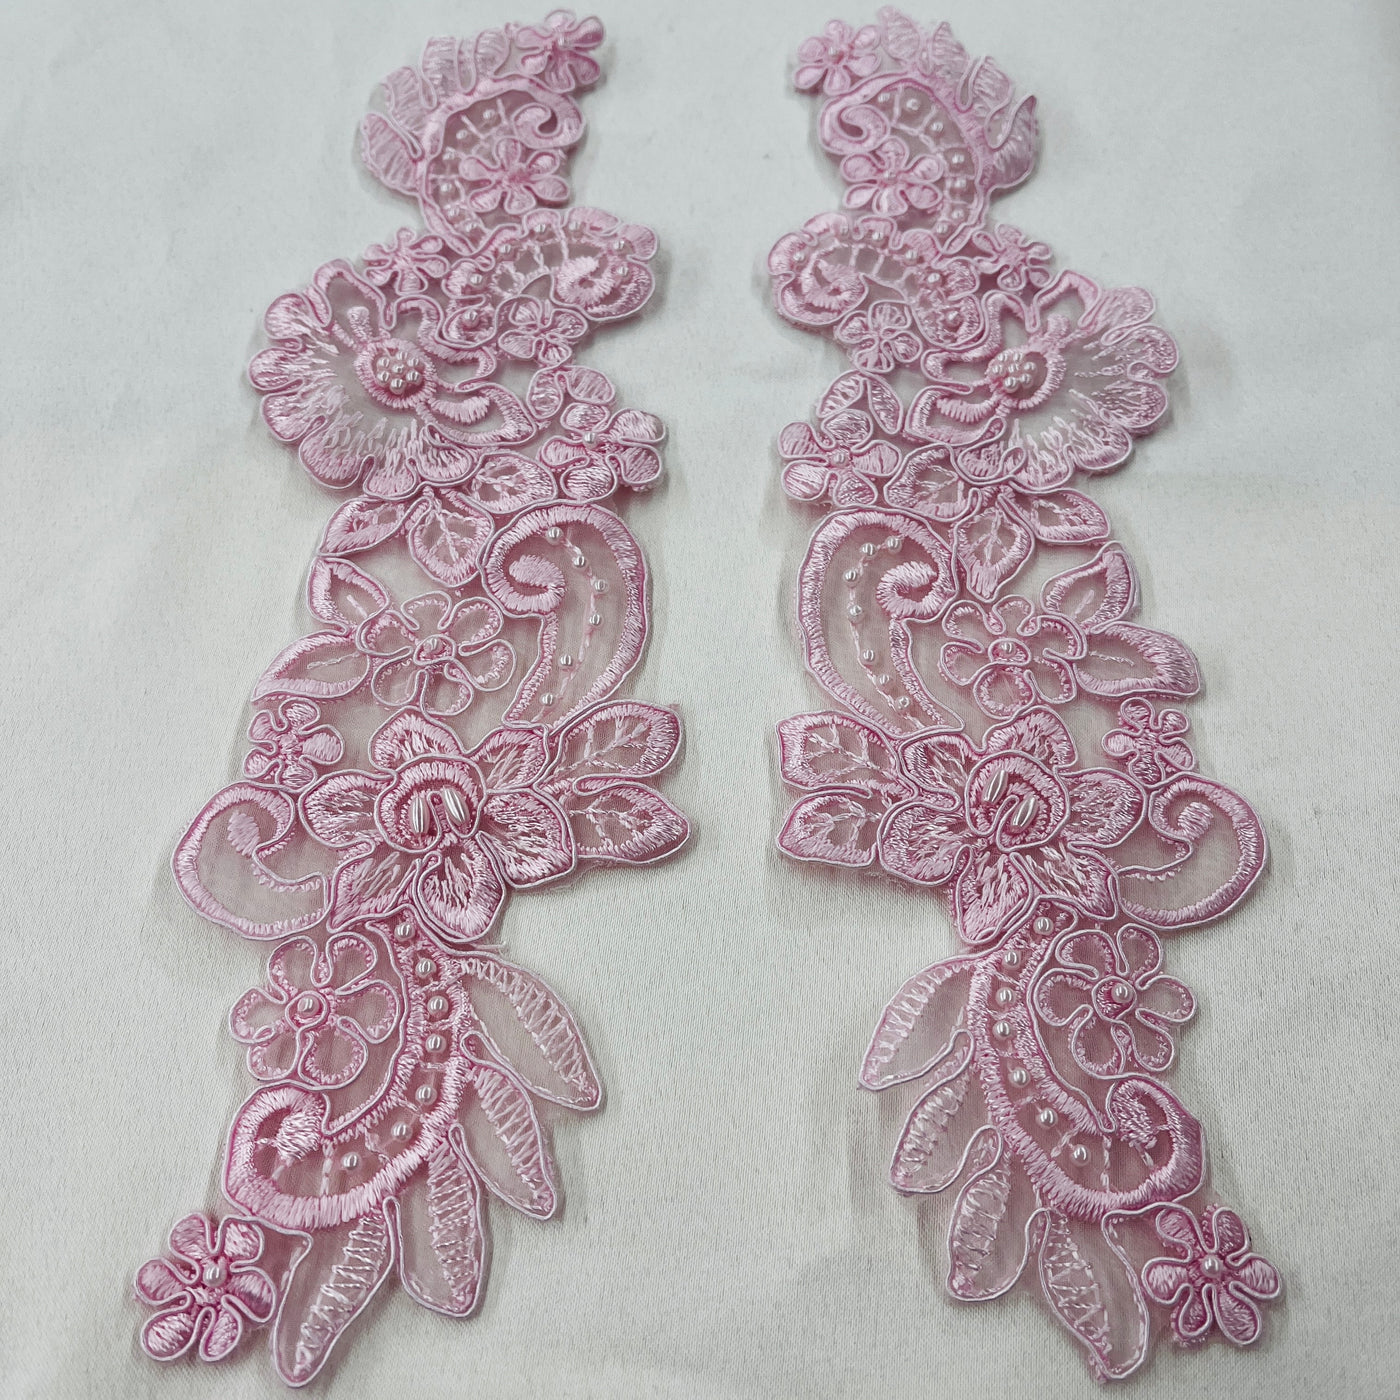 Beaded & Corded Floral Lace Applique Embroidered on 100% Polyester Organza | LaceUSA - 95931N-BP Pink